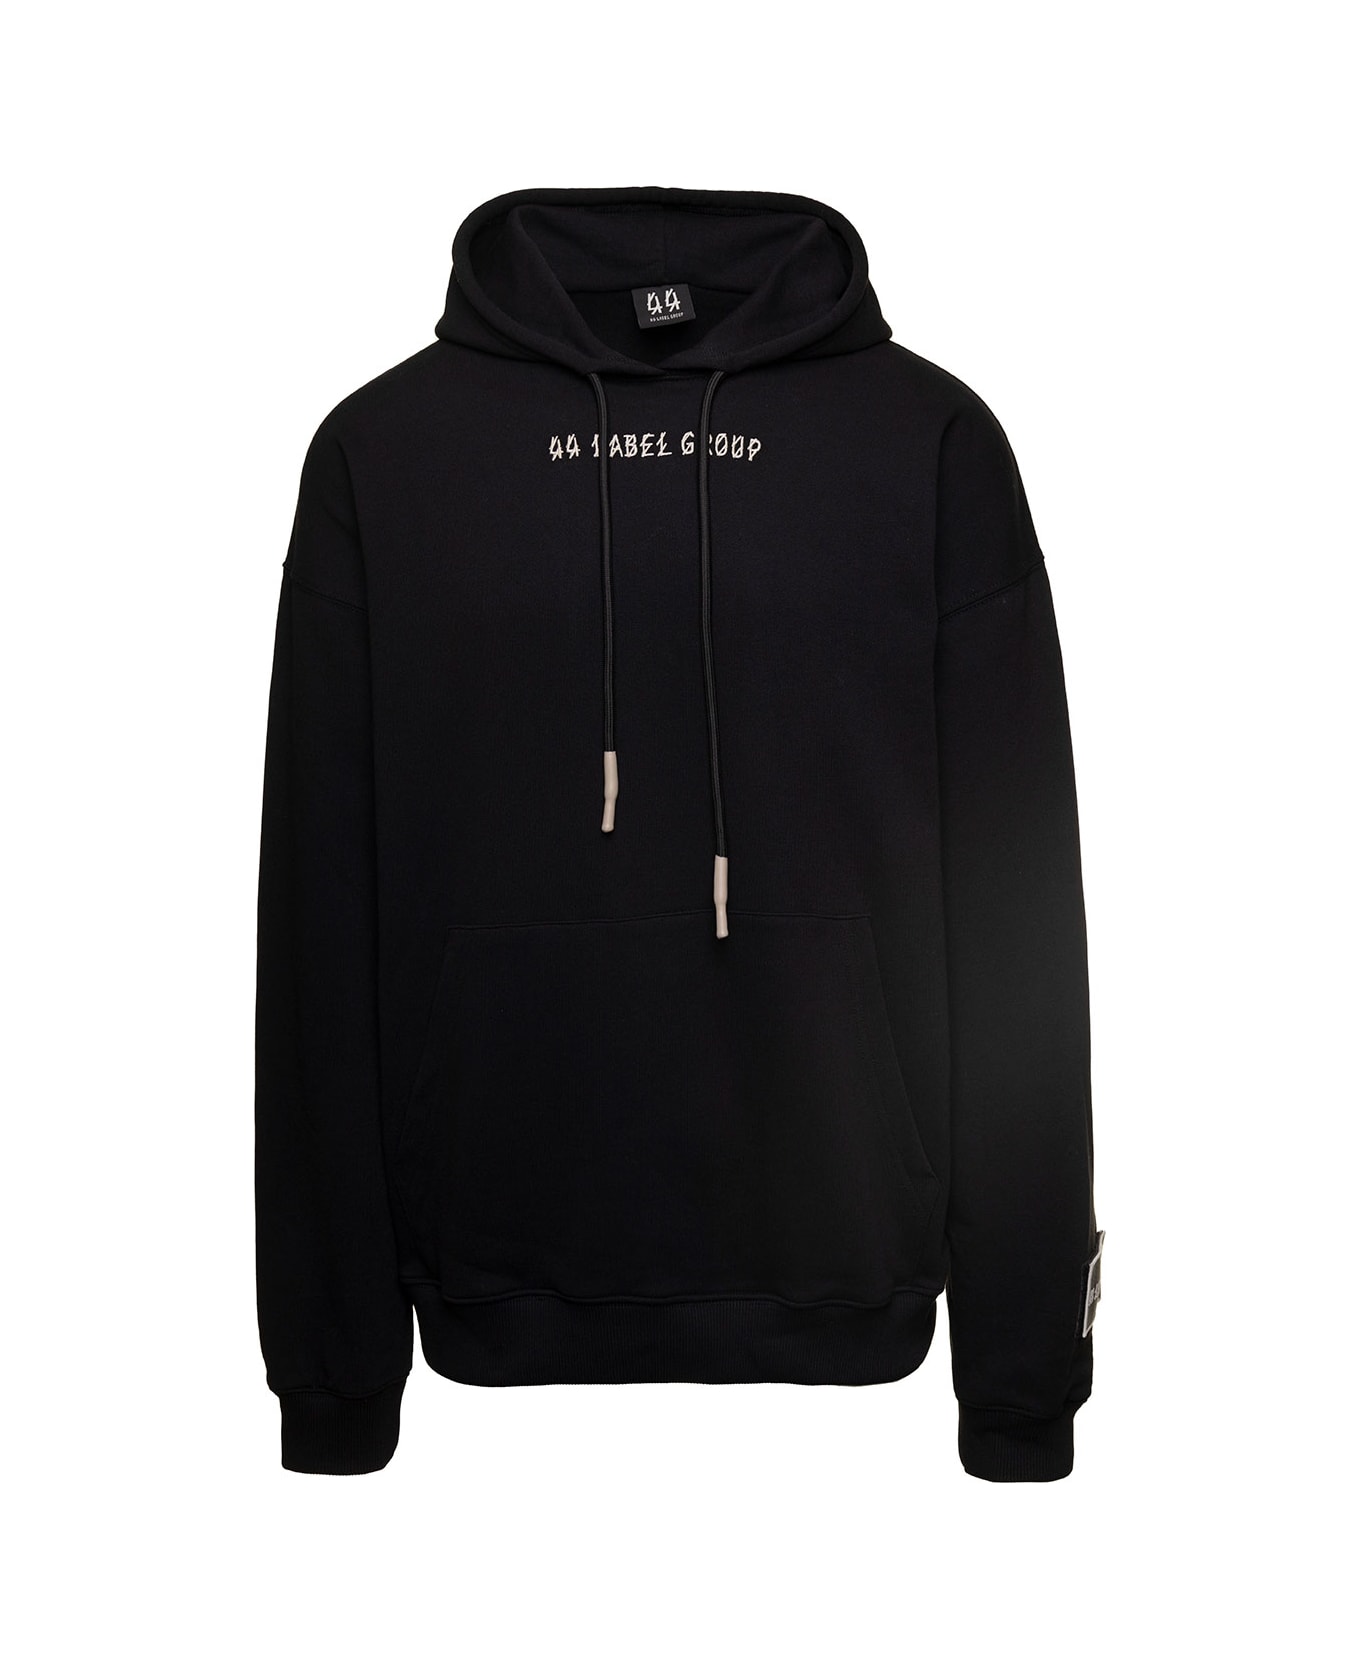 44 Label Group Black Hoodie With Contrasting Logo Embroidery In Cotton Man - Black フリース